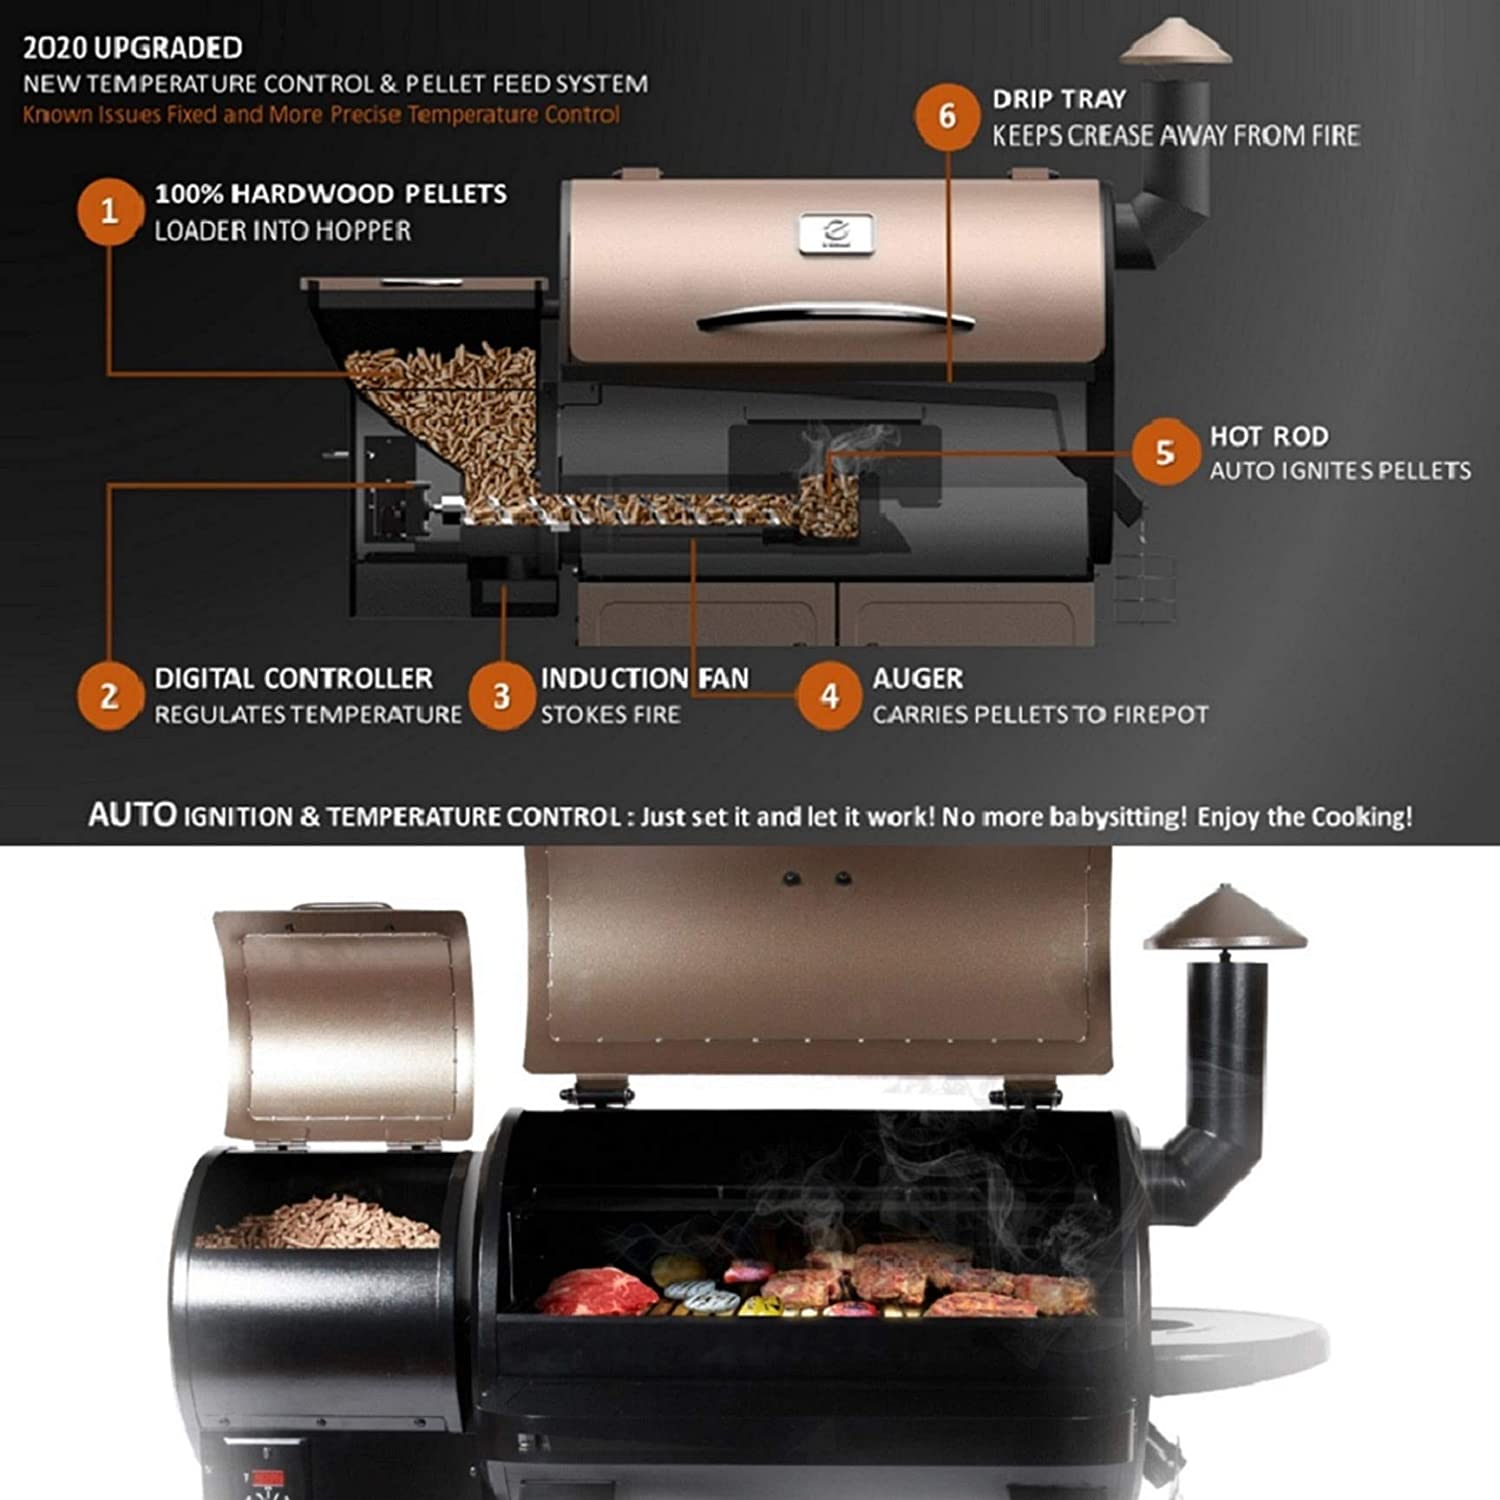 Z GRILLS L6002B Smart Wood Pellet Grill 6 in 1 Outdoor BBQ Smoker 573 SQ Inches Cooking Area Barbecue Grill Bronze - image 5 of 12